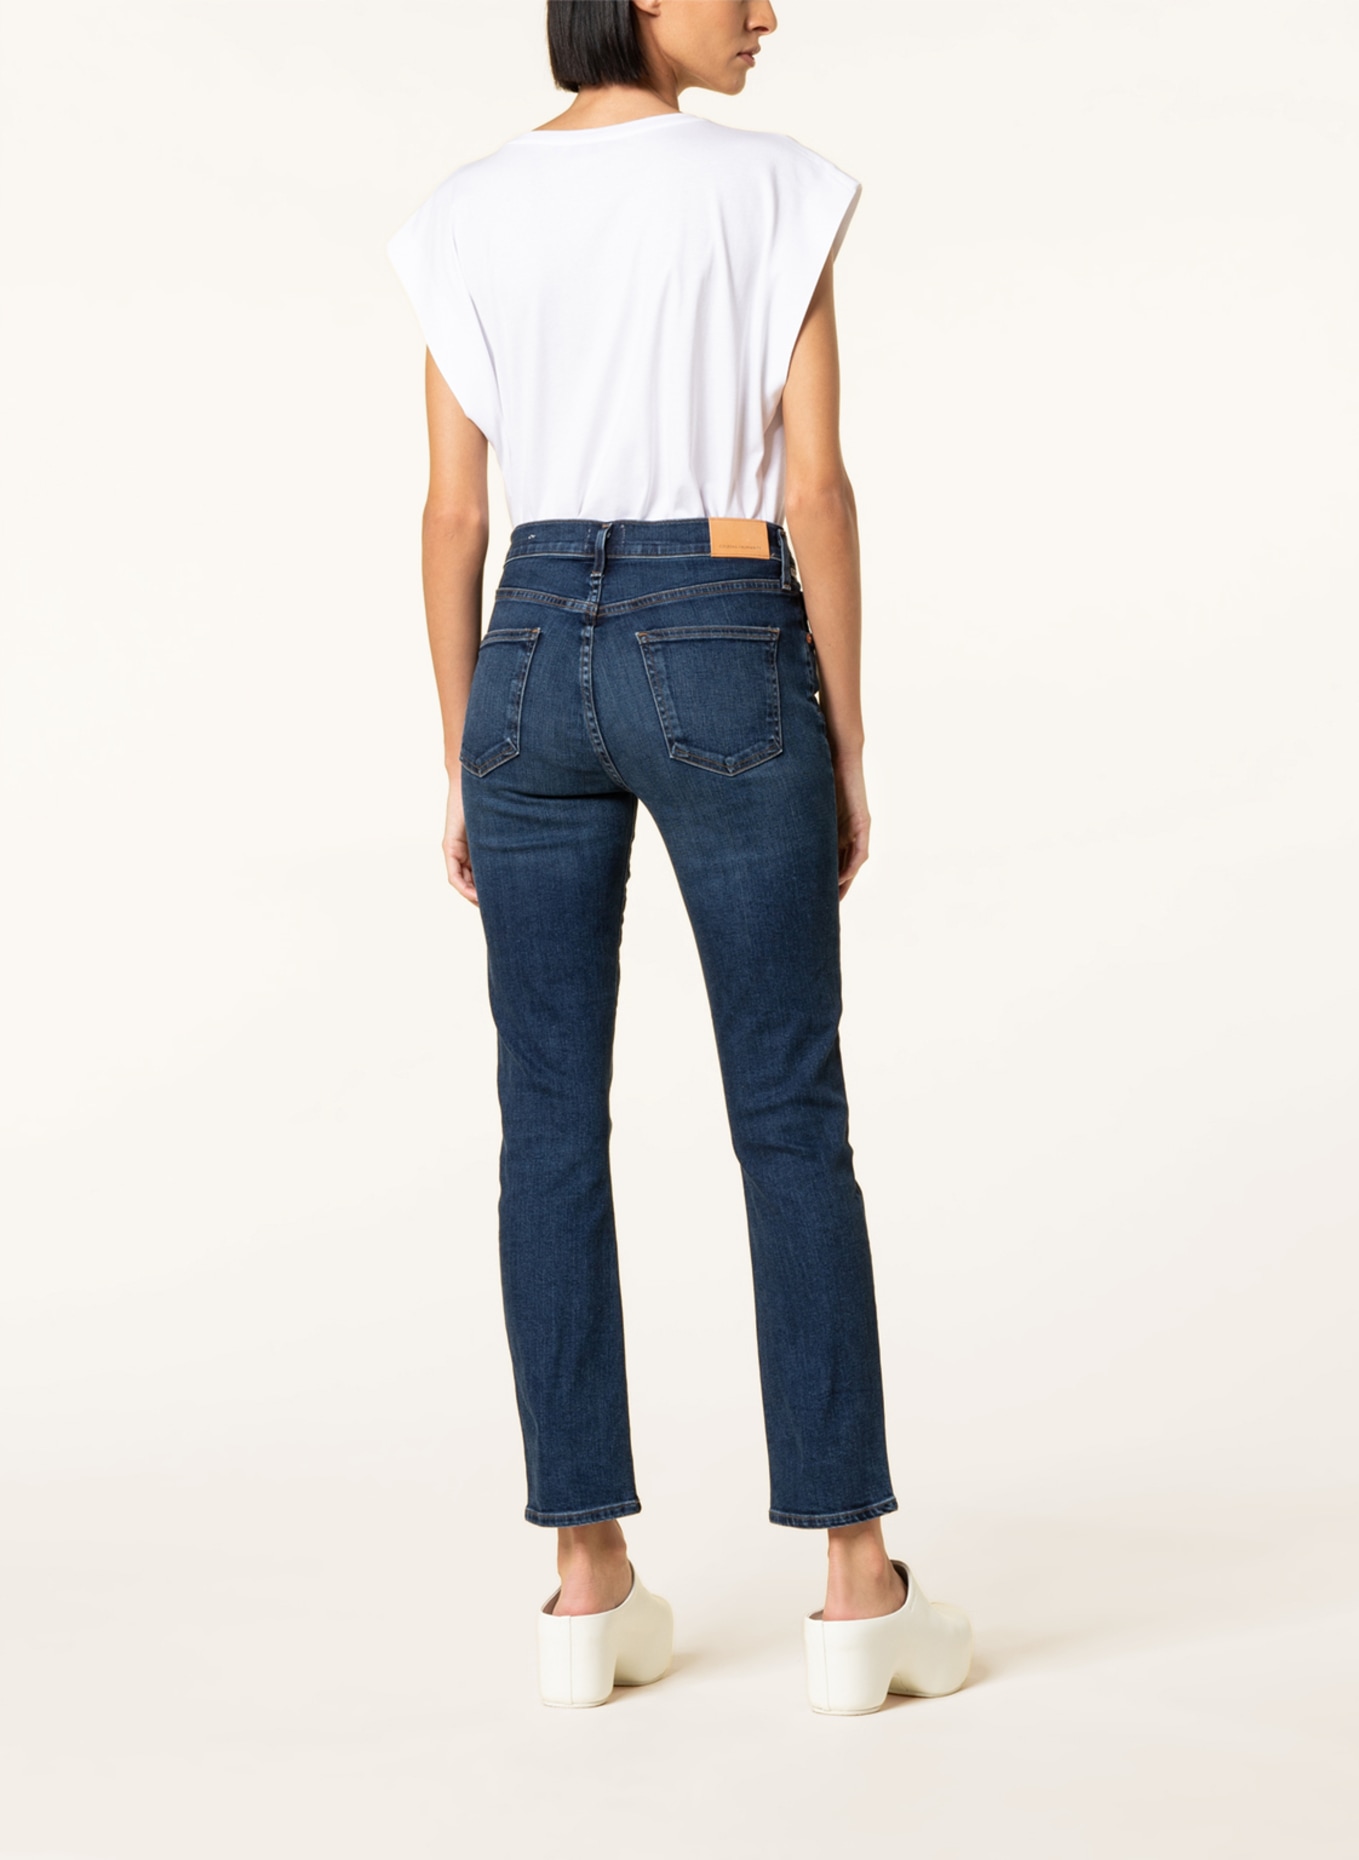 CITIZENS of HUMANITY Skinny jeans SKYLA , Color: Evermore dk indigo (Image 3)